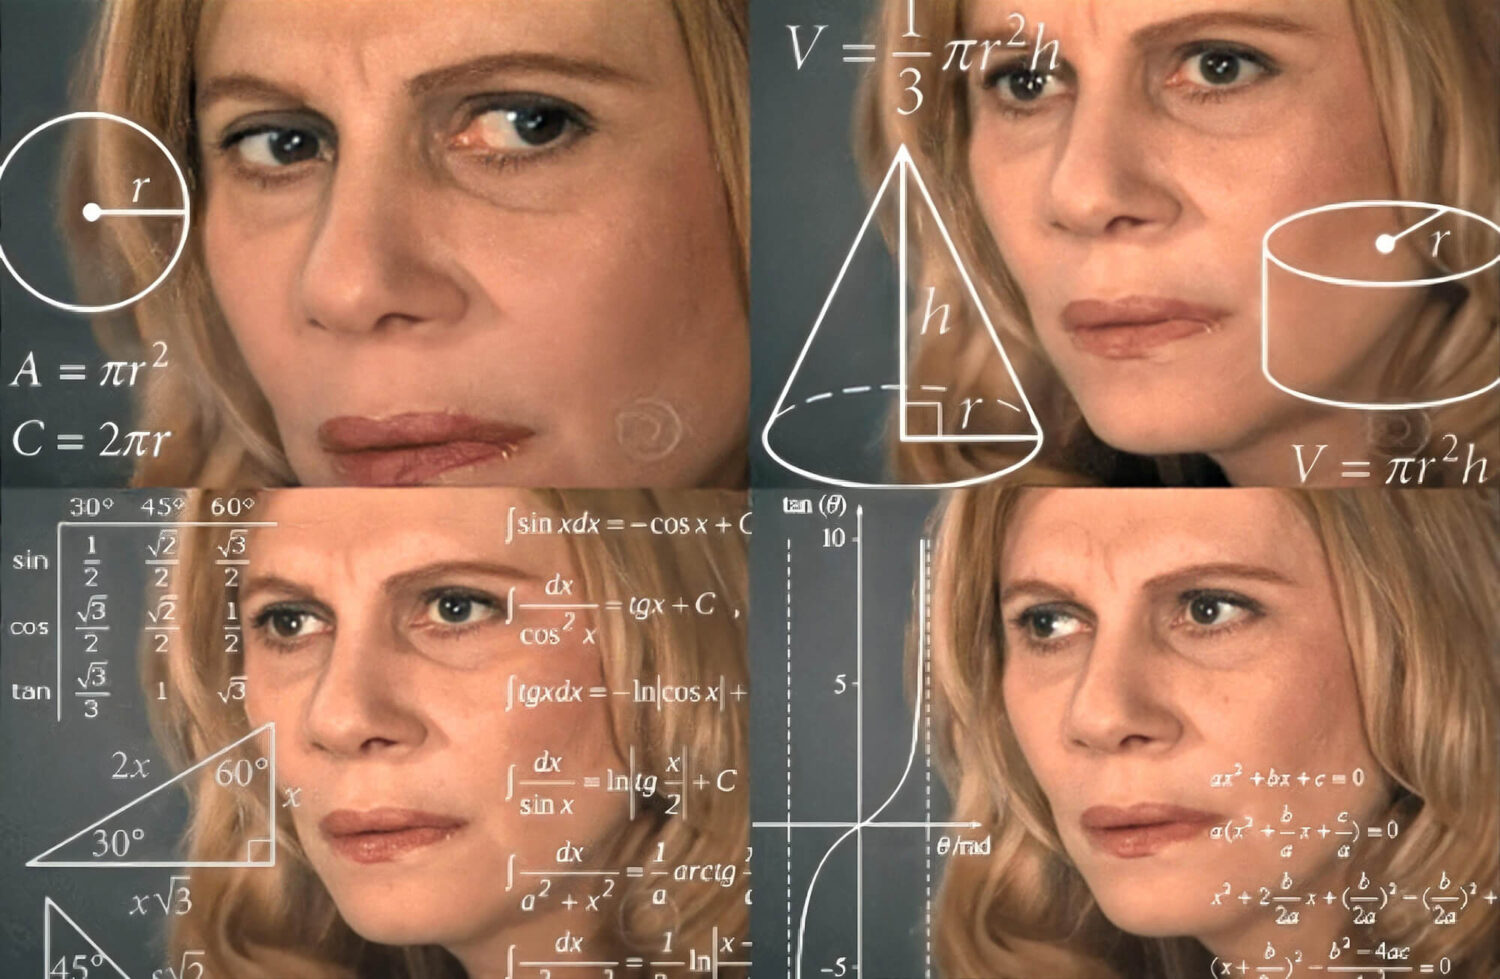 The overthinking woman meme.  A classic meme that satirises a woman overthinking something.
There is 4 close up images of an anxious looking woman overlaid with scientific formulas.